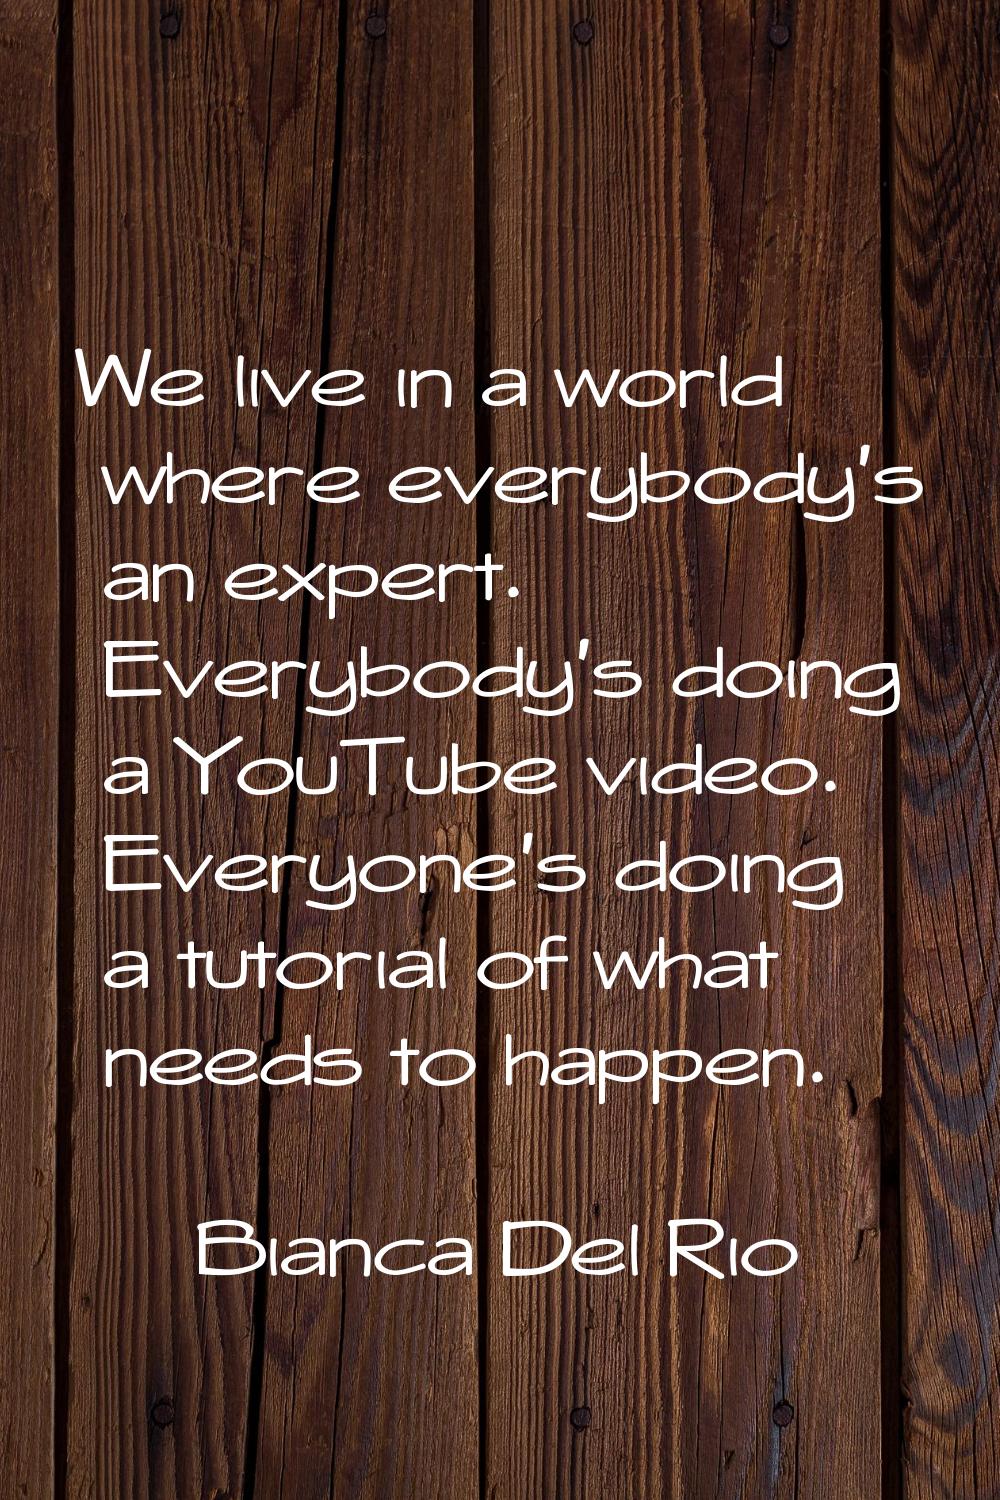 We live in a world where everybody's an expert. Everybody's doing a YouTube video. Everyone's doing